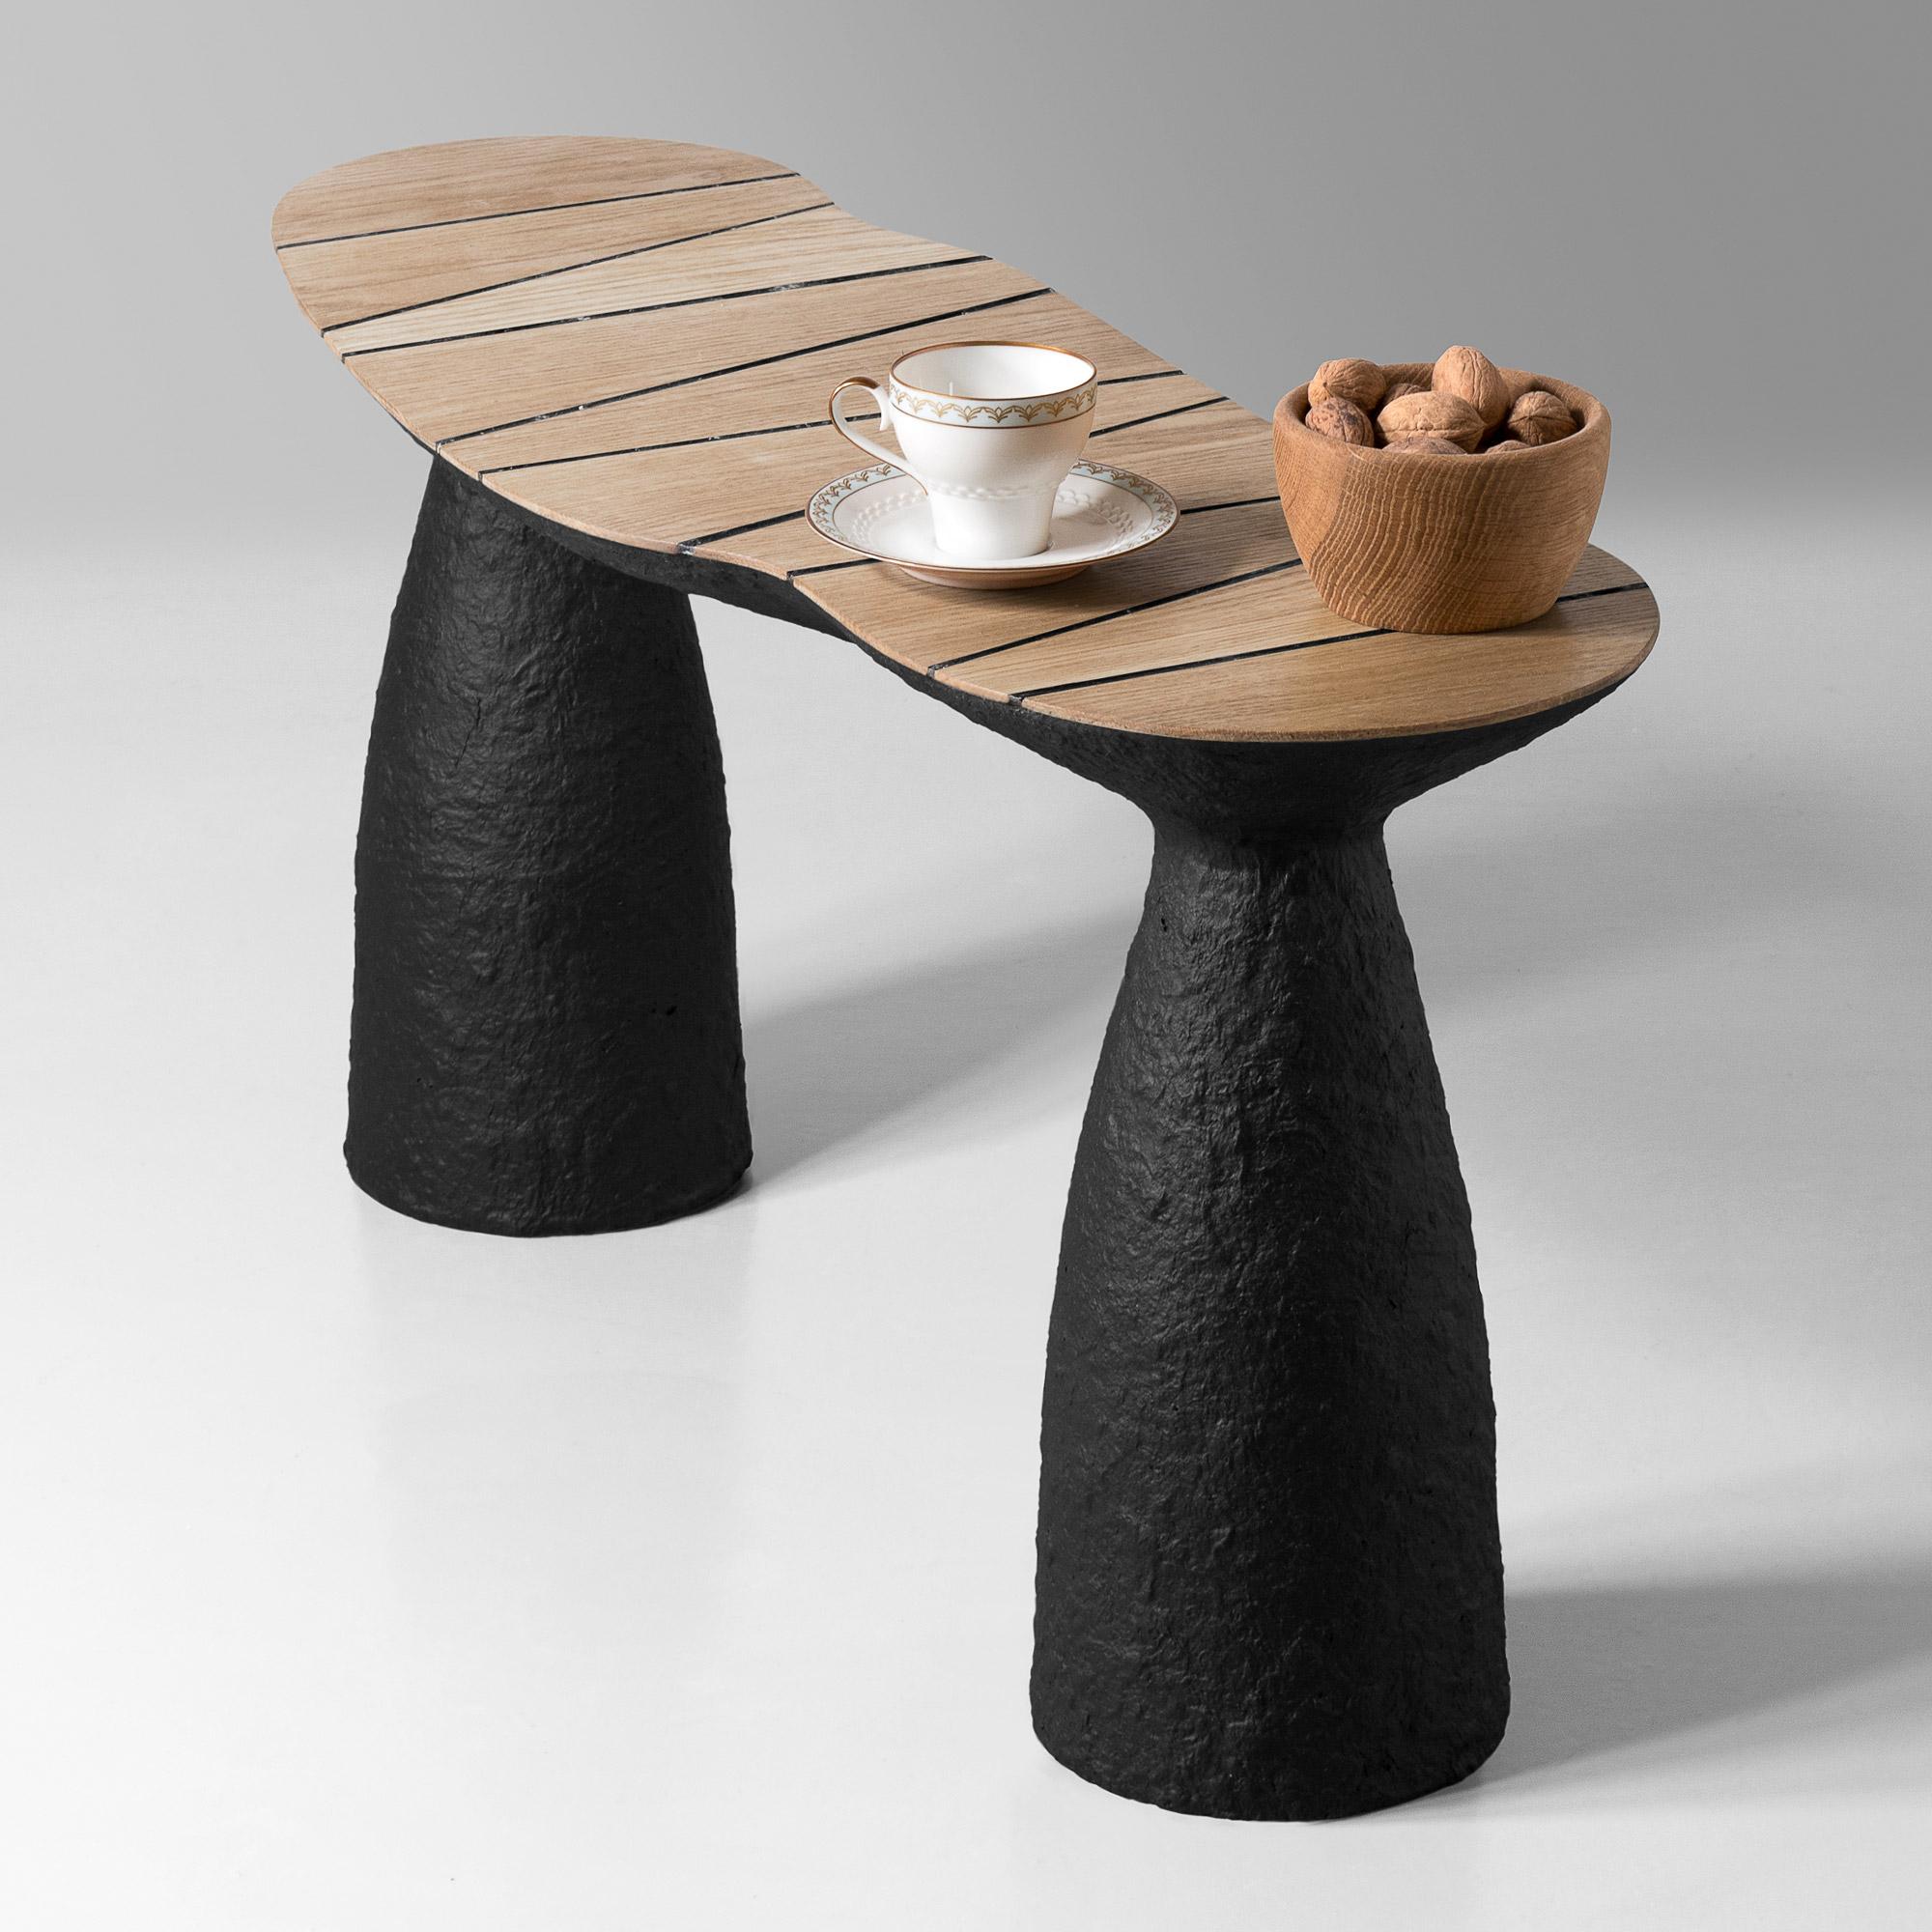 Hand-Crafted Bench Brutalist Interior Accent by Donatas Žukauskas For Sale